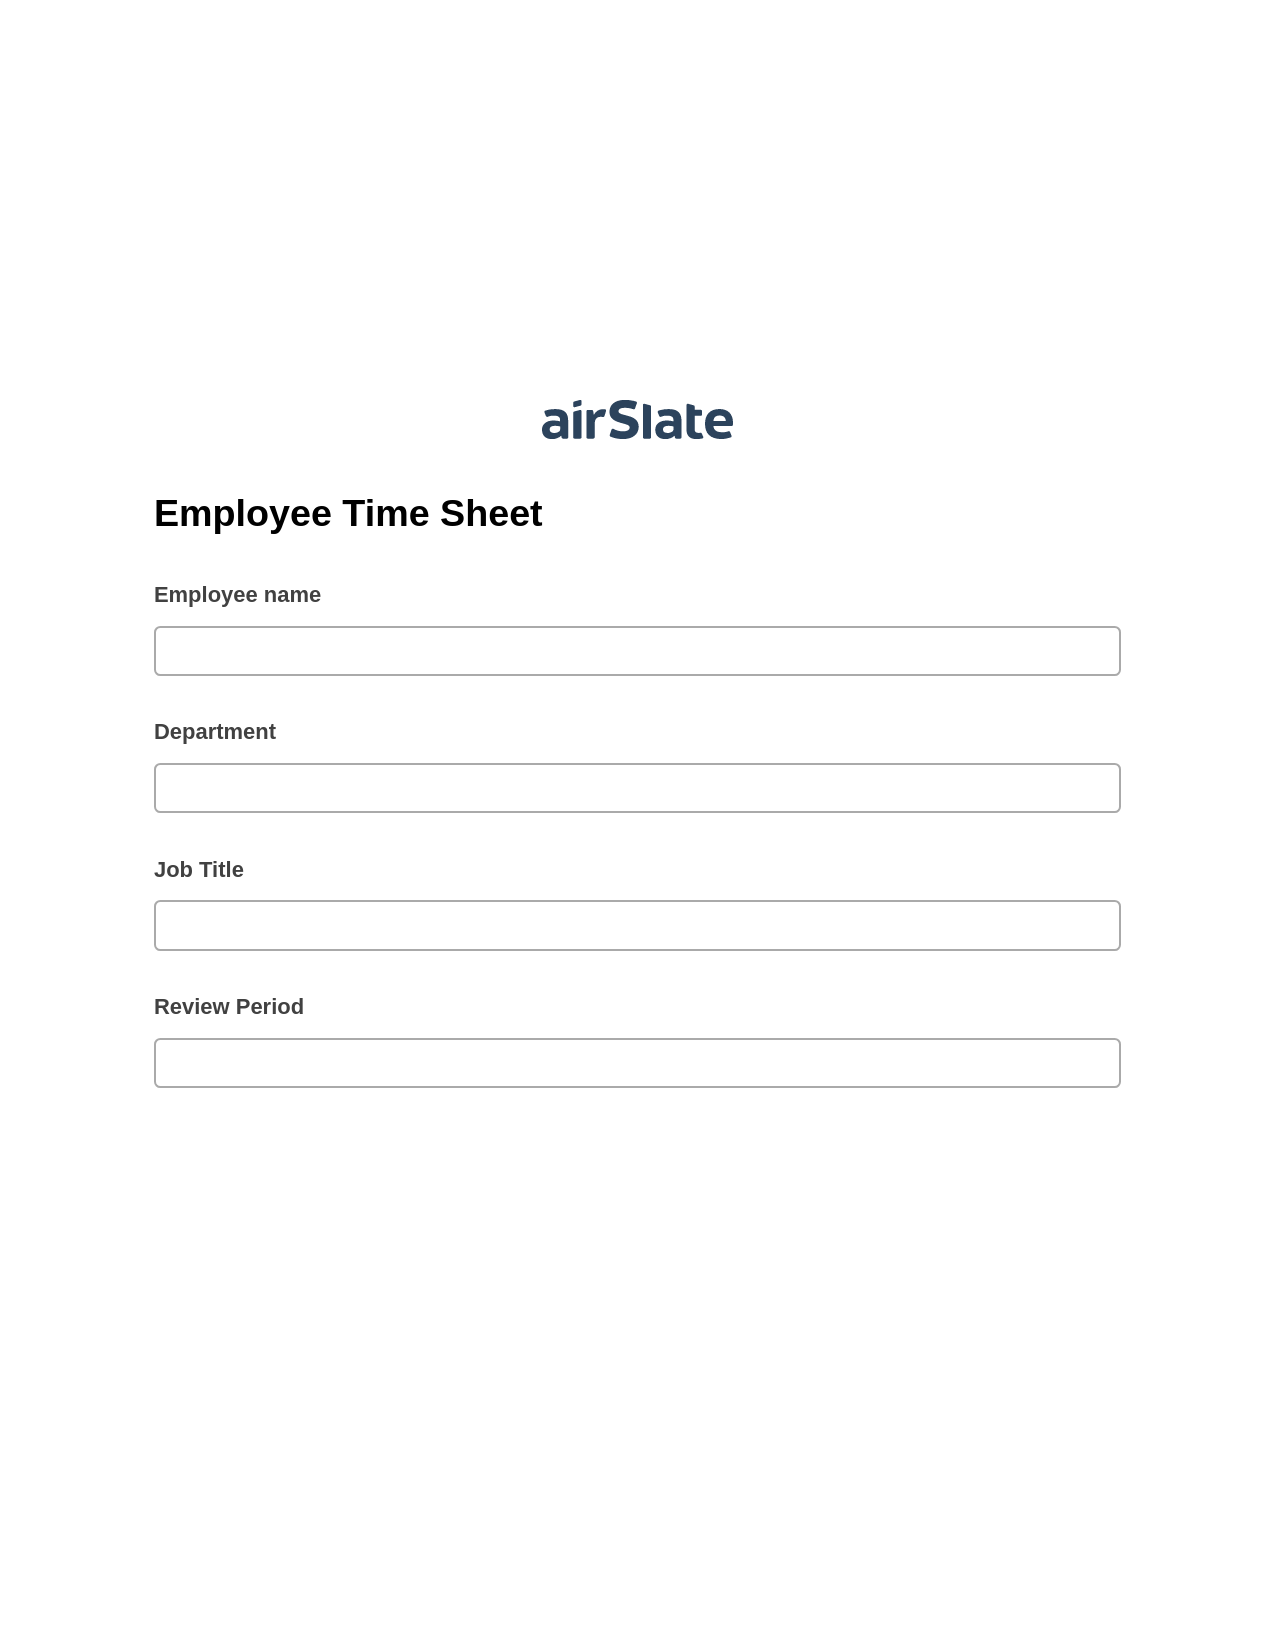 Employee Time Sheet Pre-fill from MySQL Bot, Send a Slate with Roles Bot, Archive to SharePoint Folder Bot